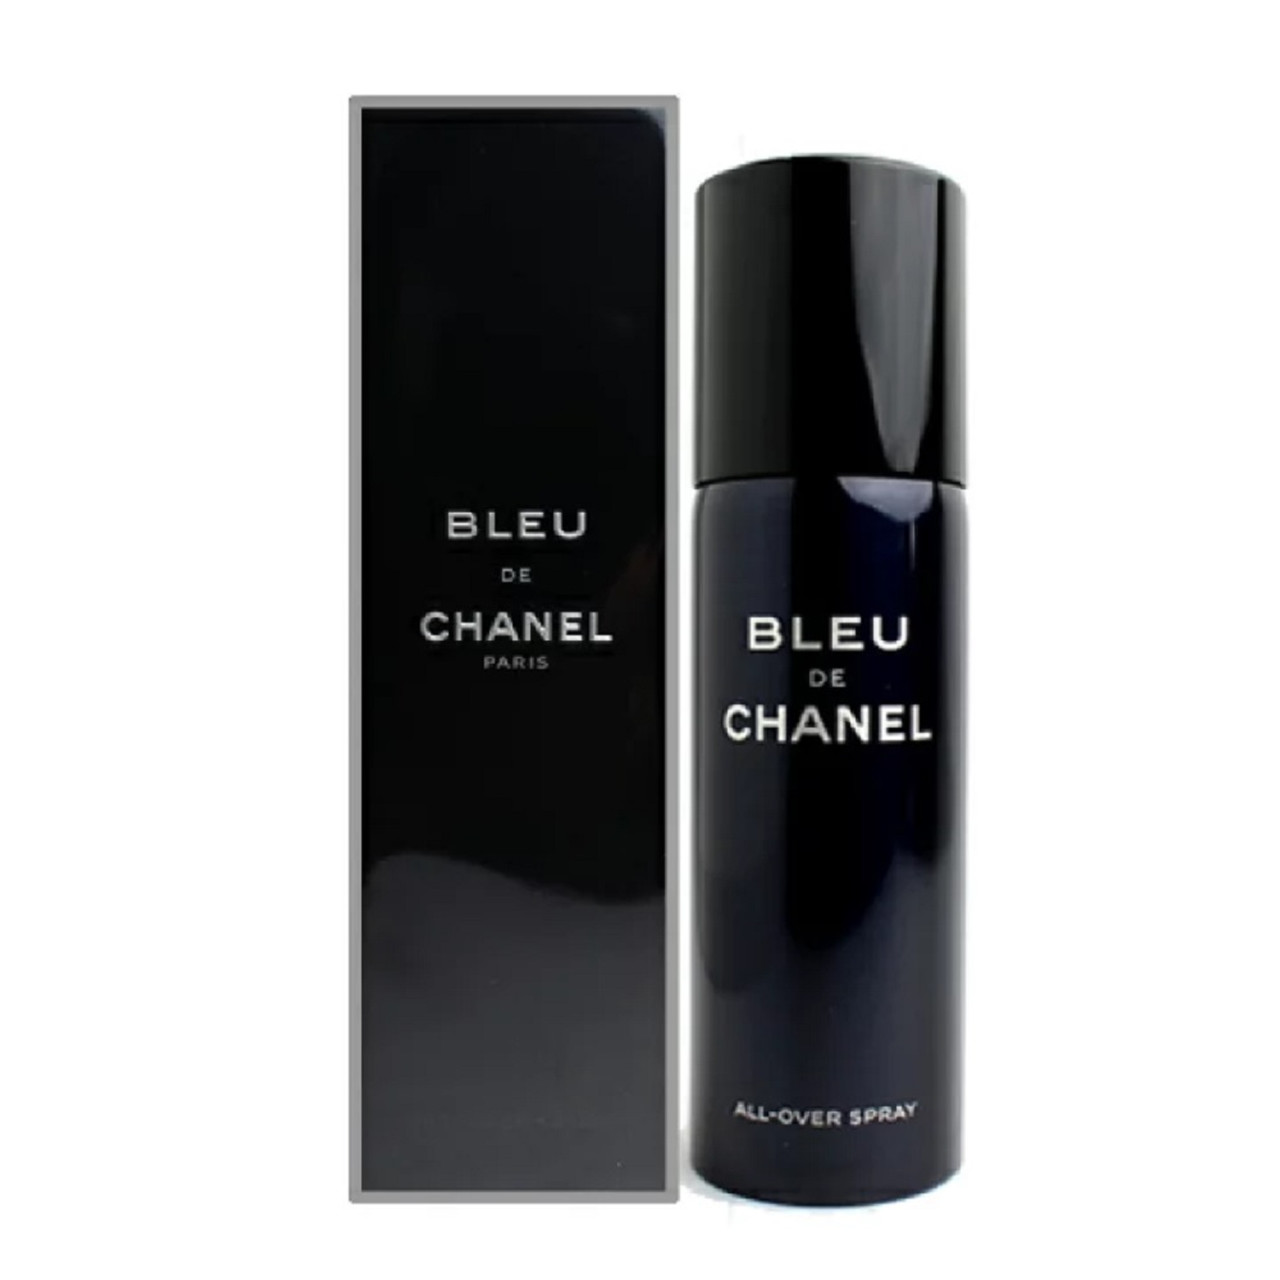 BLEU DE CHANEL All-Over Spray by CHANEL at ORCHARD MILE